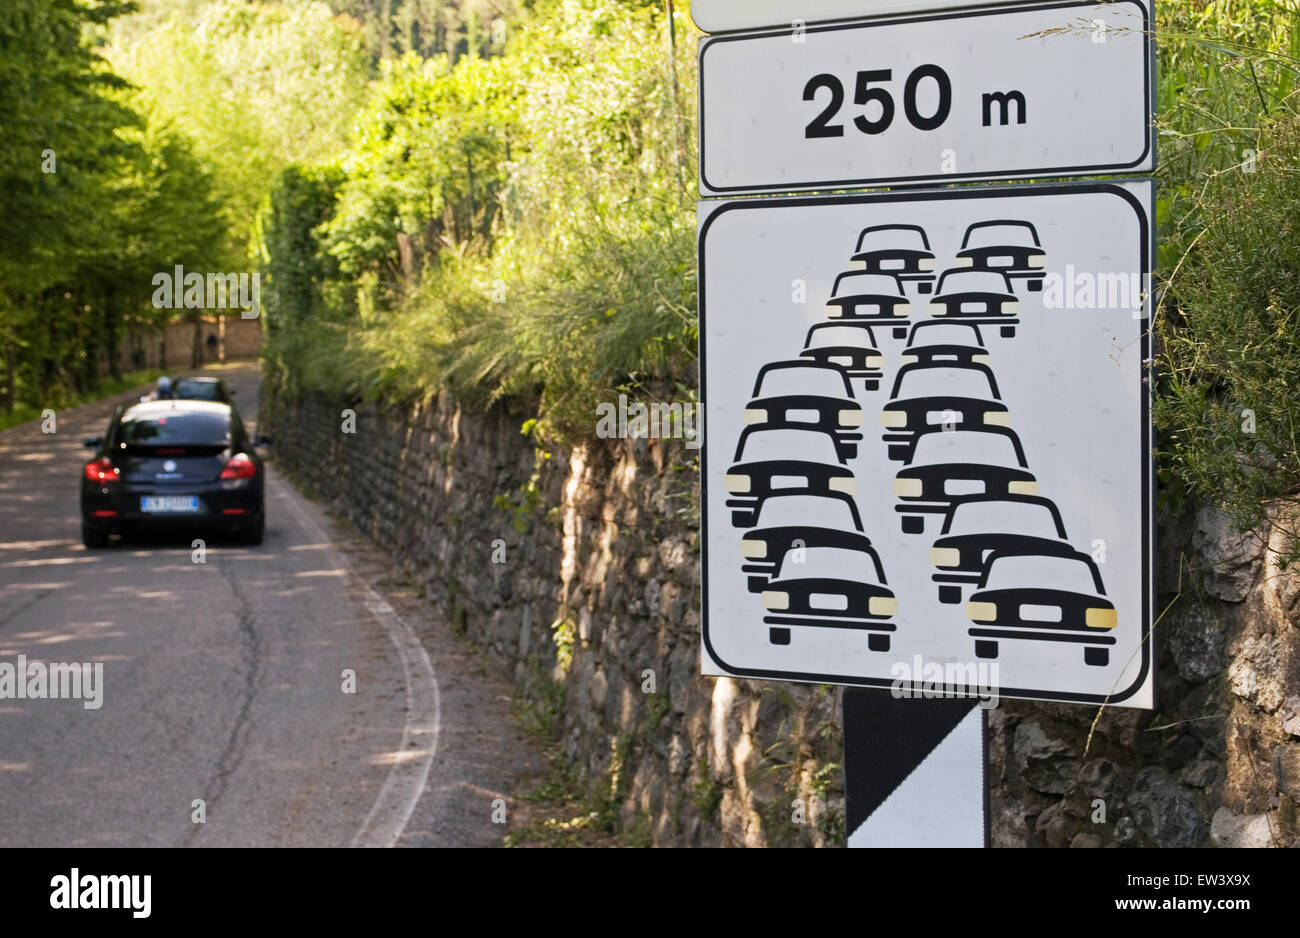 Cars queuing symbol on traffic sign, Italy Stock Photo